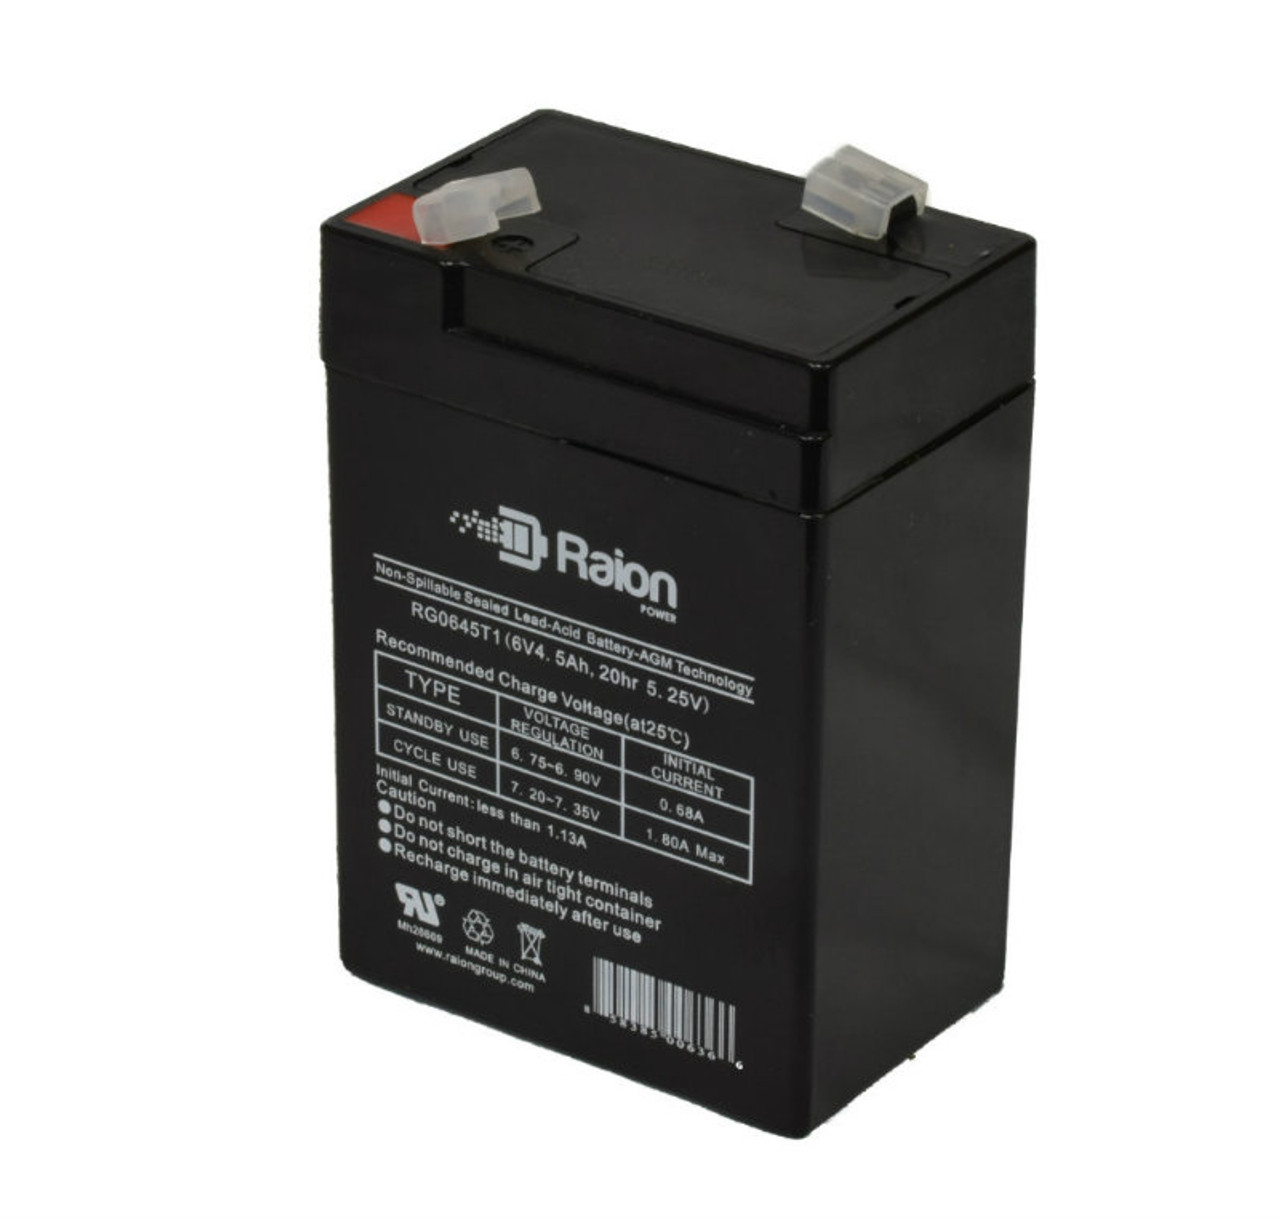 Raion Power RG0645T1 6V 4.5Ah Replacement Battery Cartridge for Super Lucky Duck Combo Drake